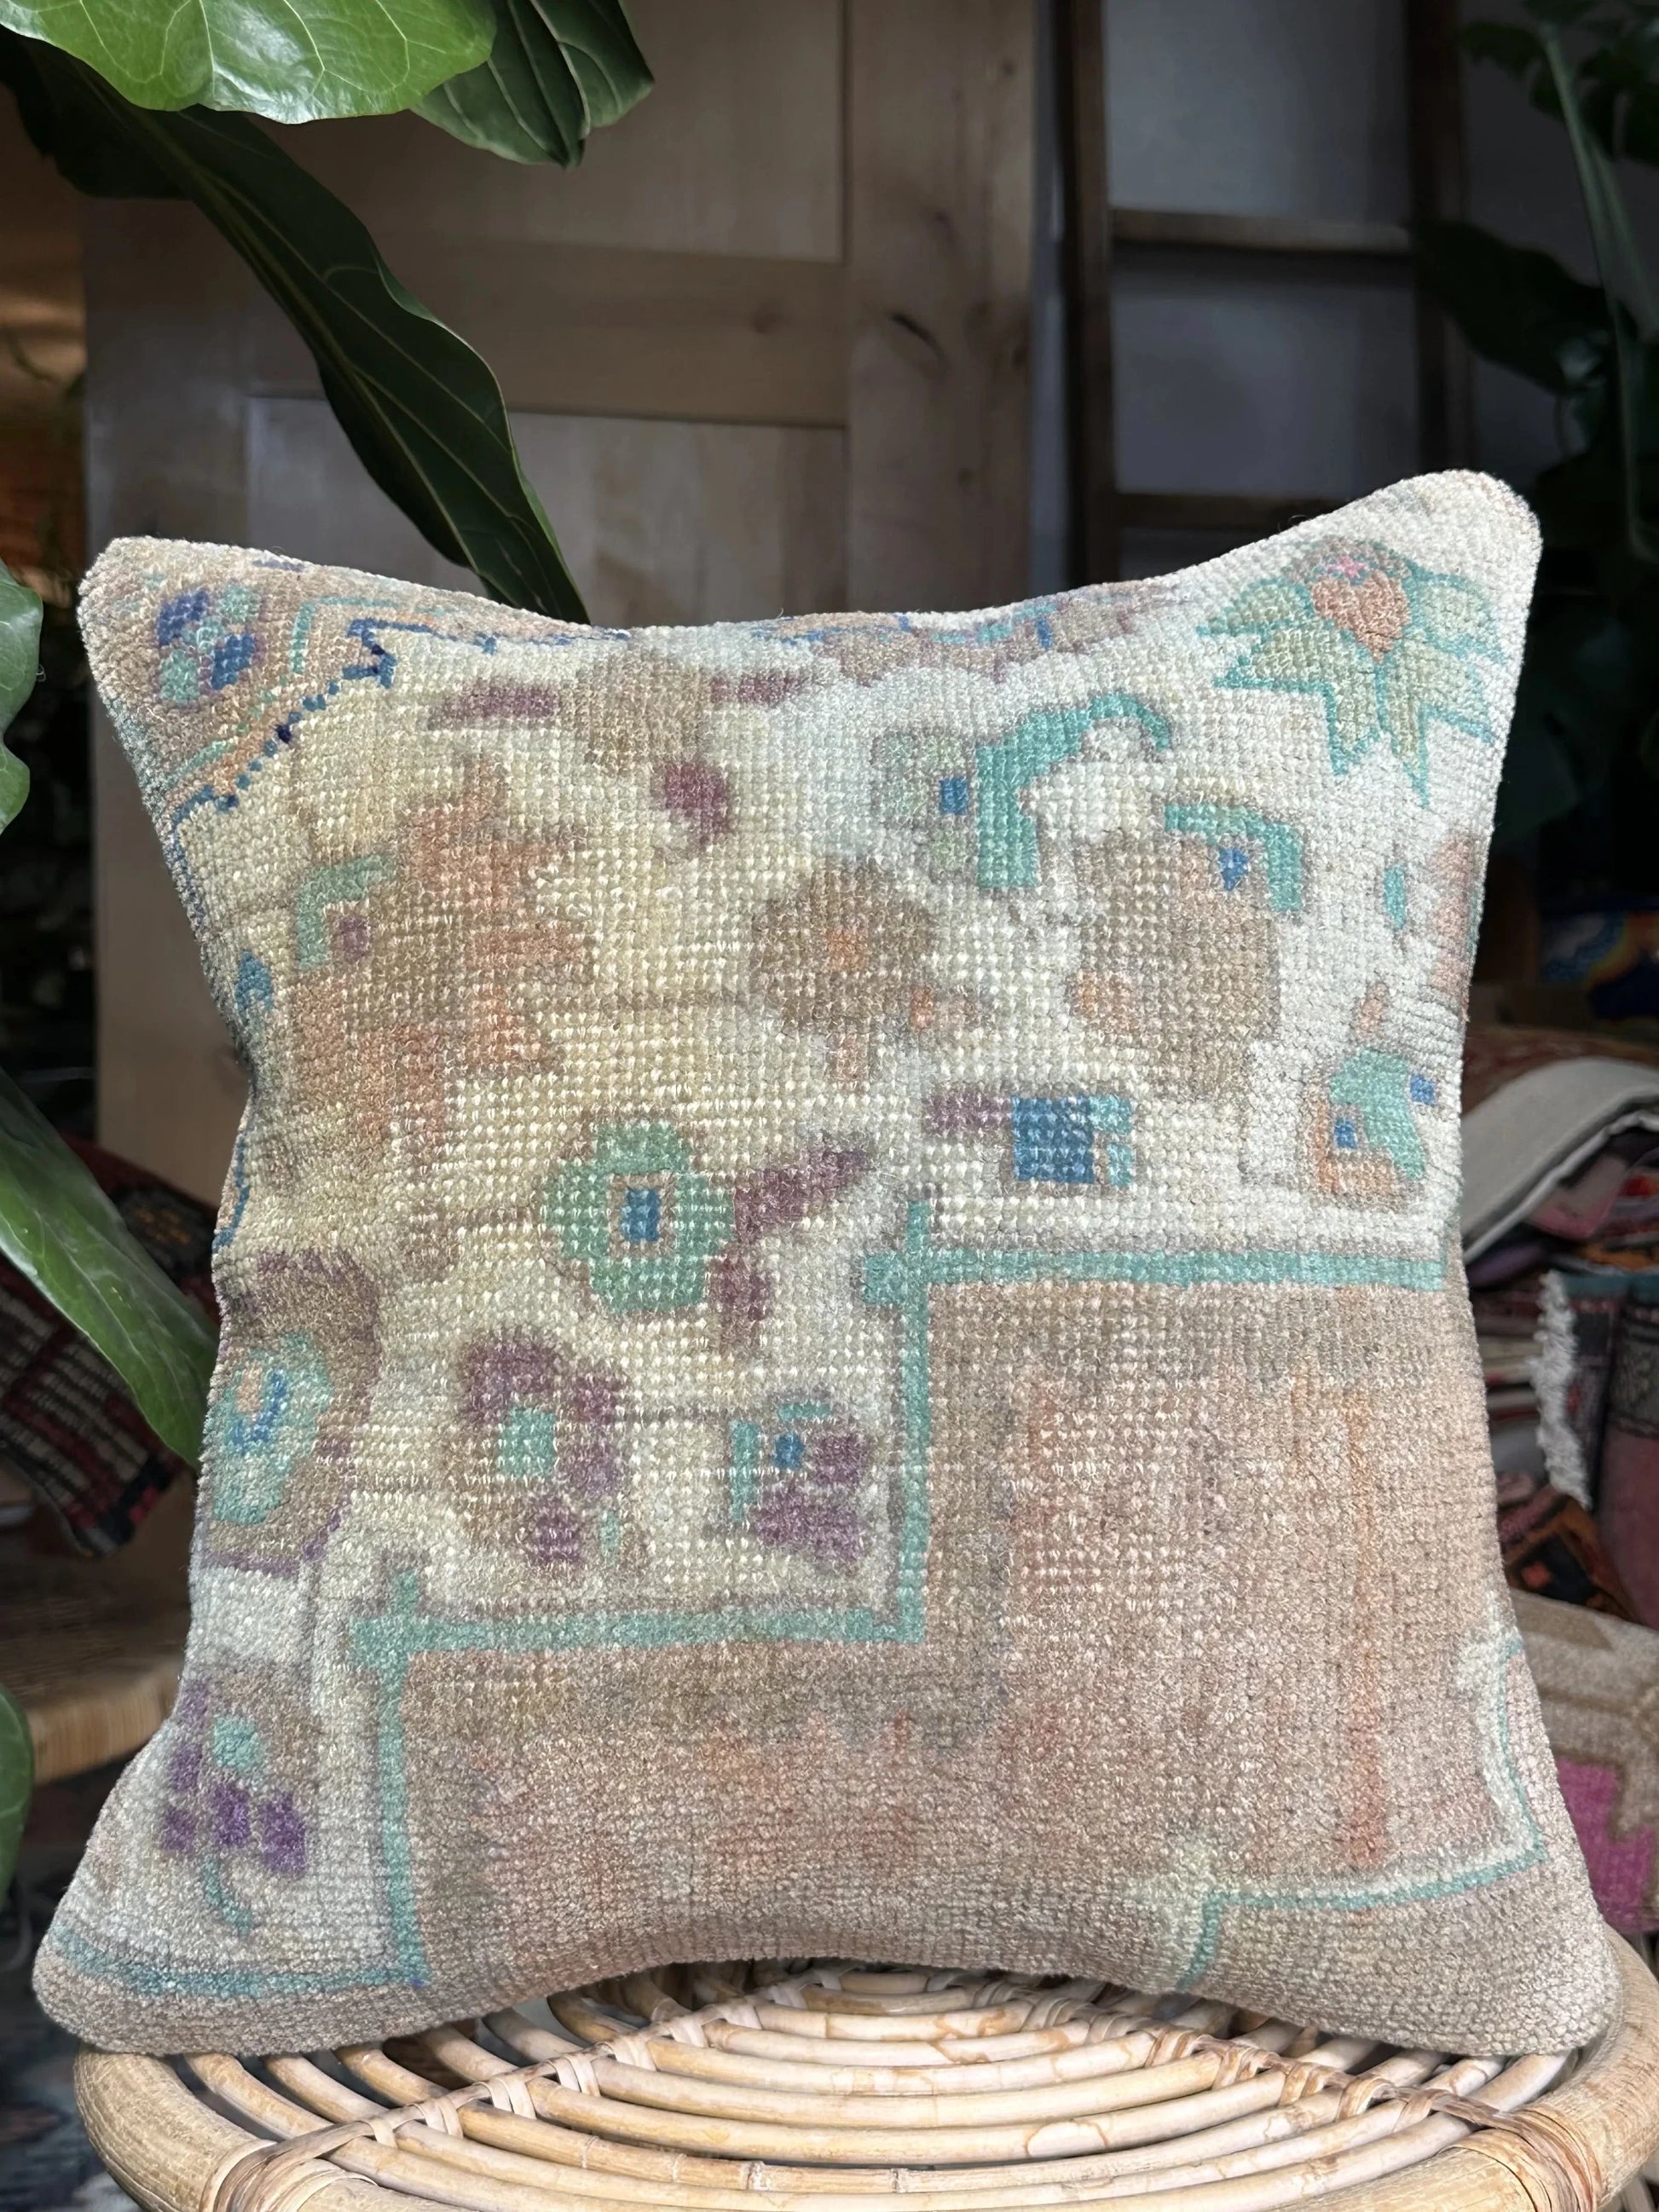 15 by 15 neutral Turkish throw pillow featuring soft pile and muted blue and white tones and a floral pattern upcycled from a Turkish rug